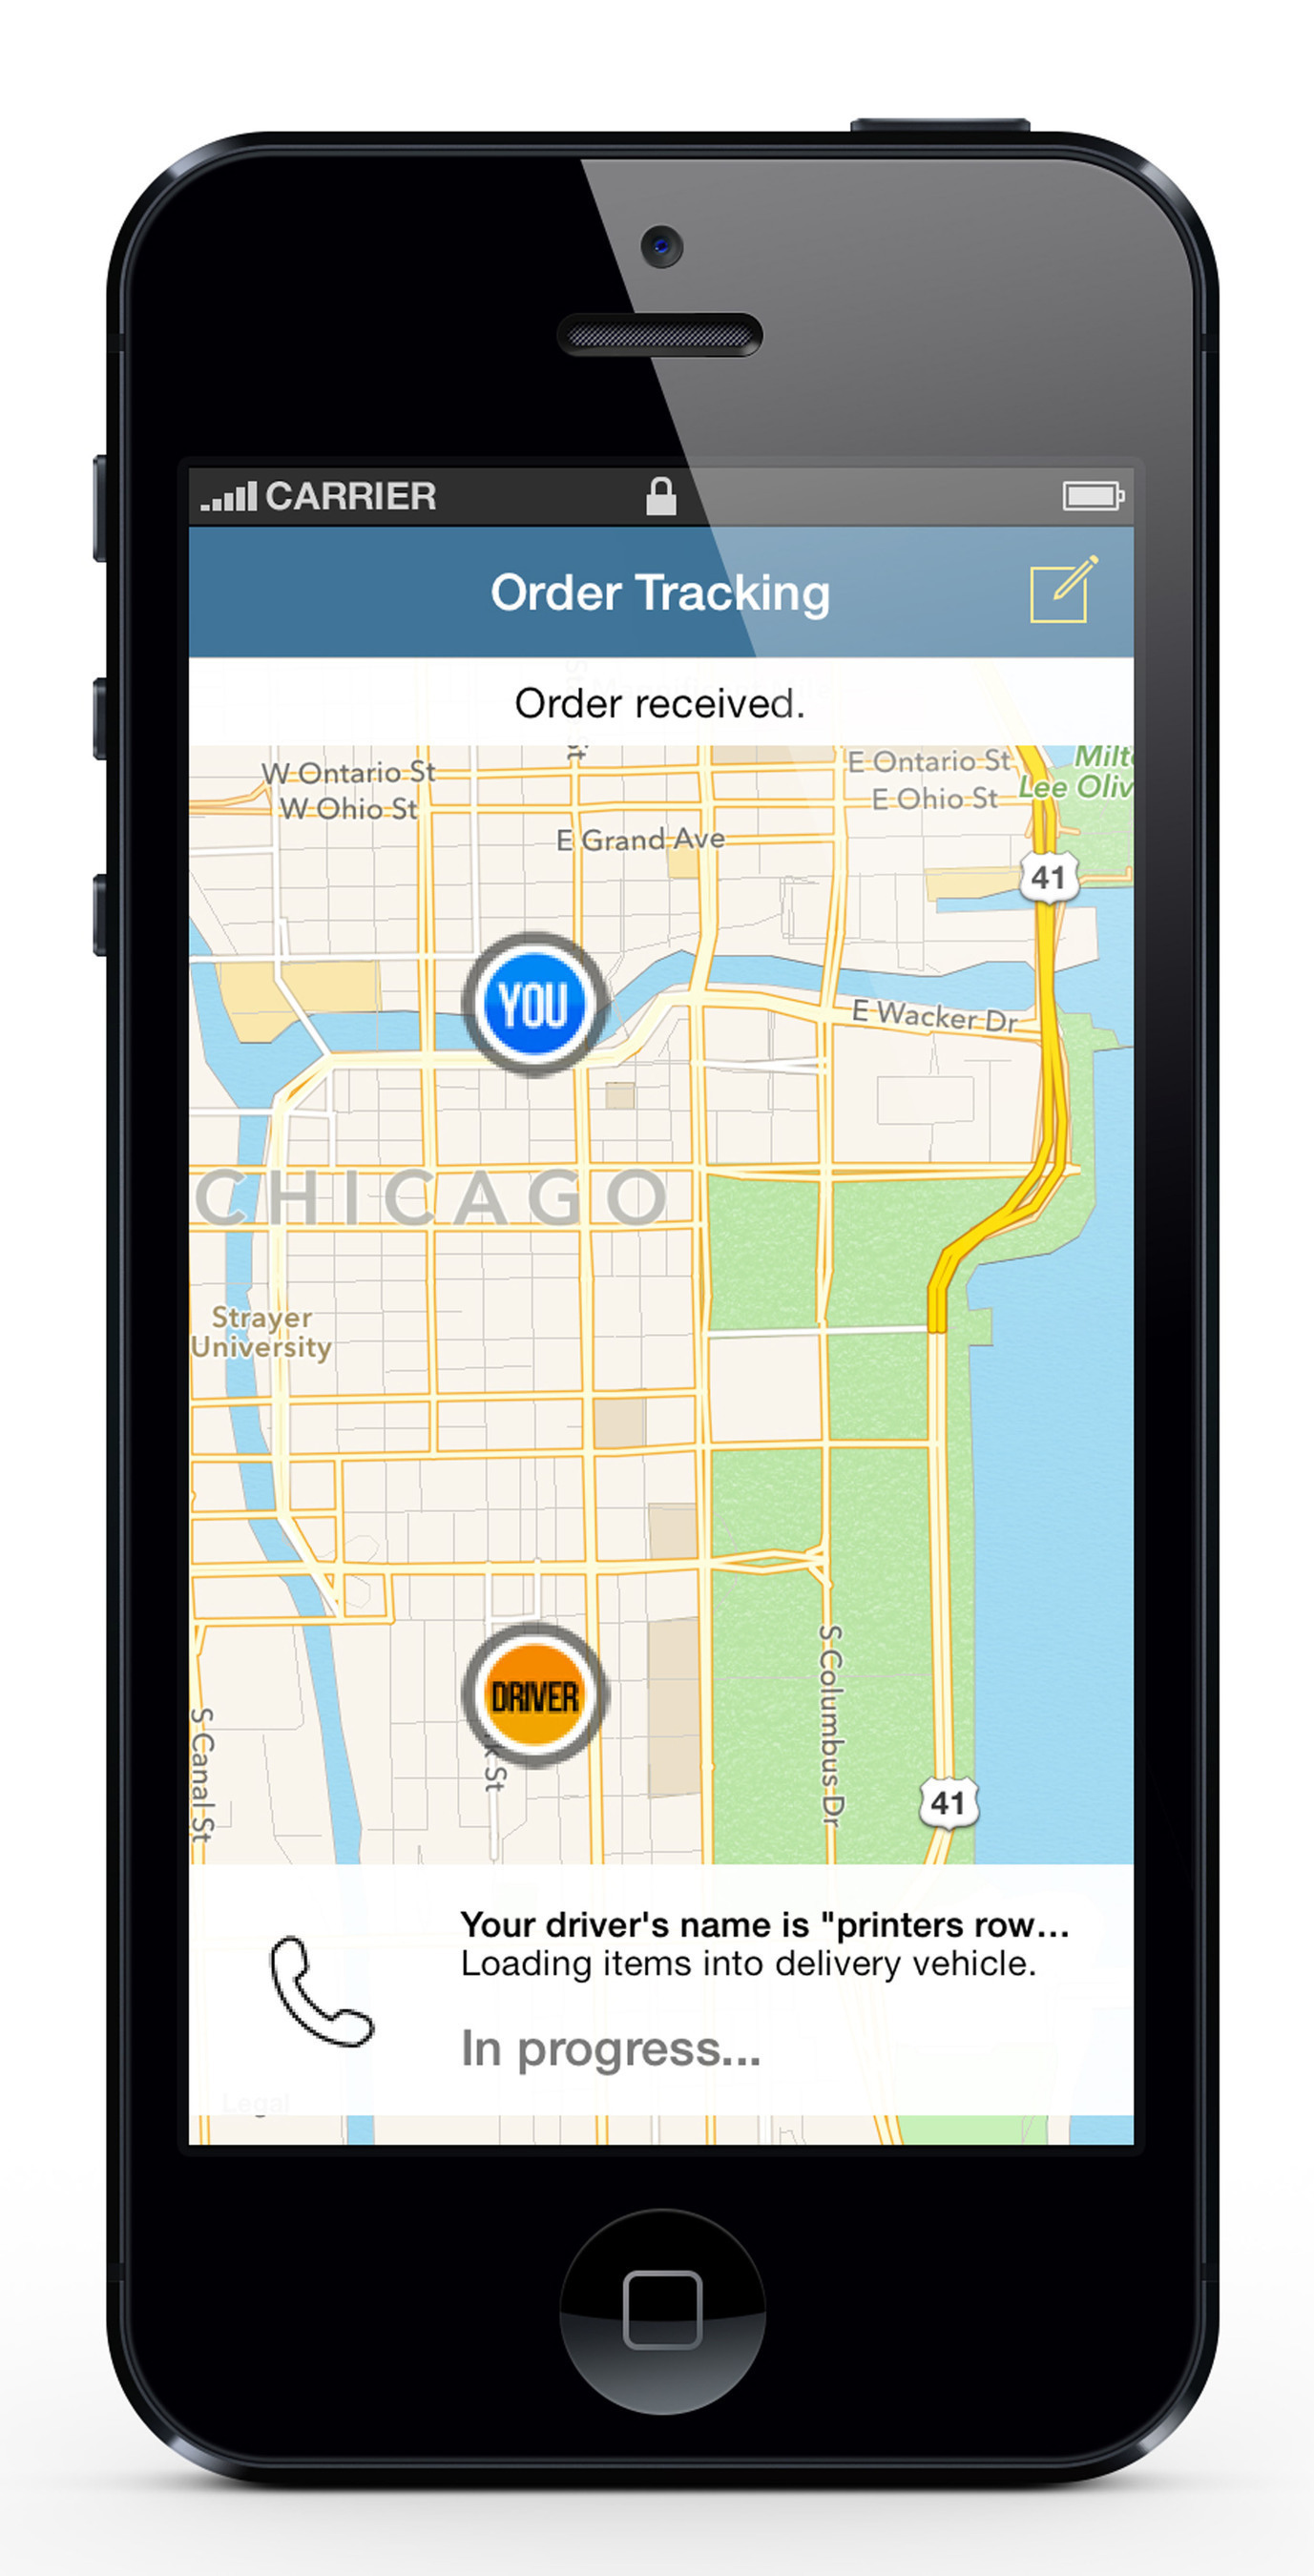 Drizly, the smartphone app for fast, convenient alcohol delivery, today announced service throughout Chicago. Simply download and order, and alcohol is delivered in just 20-40 minutes. (PRNewsFoto/Drizly) (PRNewsFoto/Drizly)